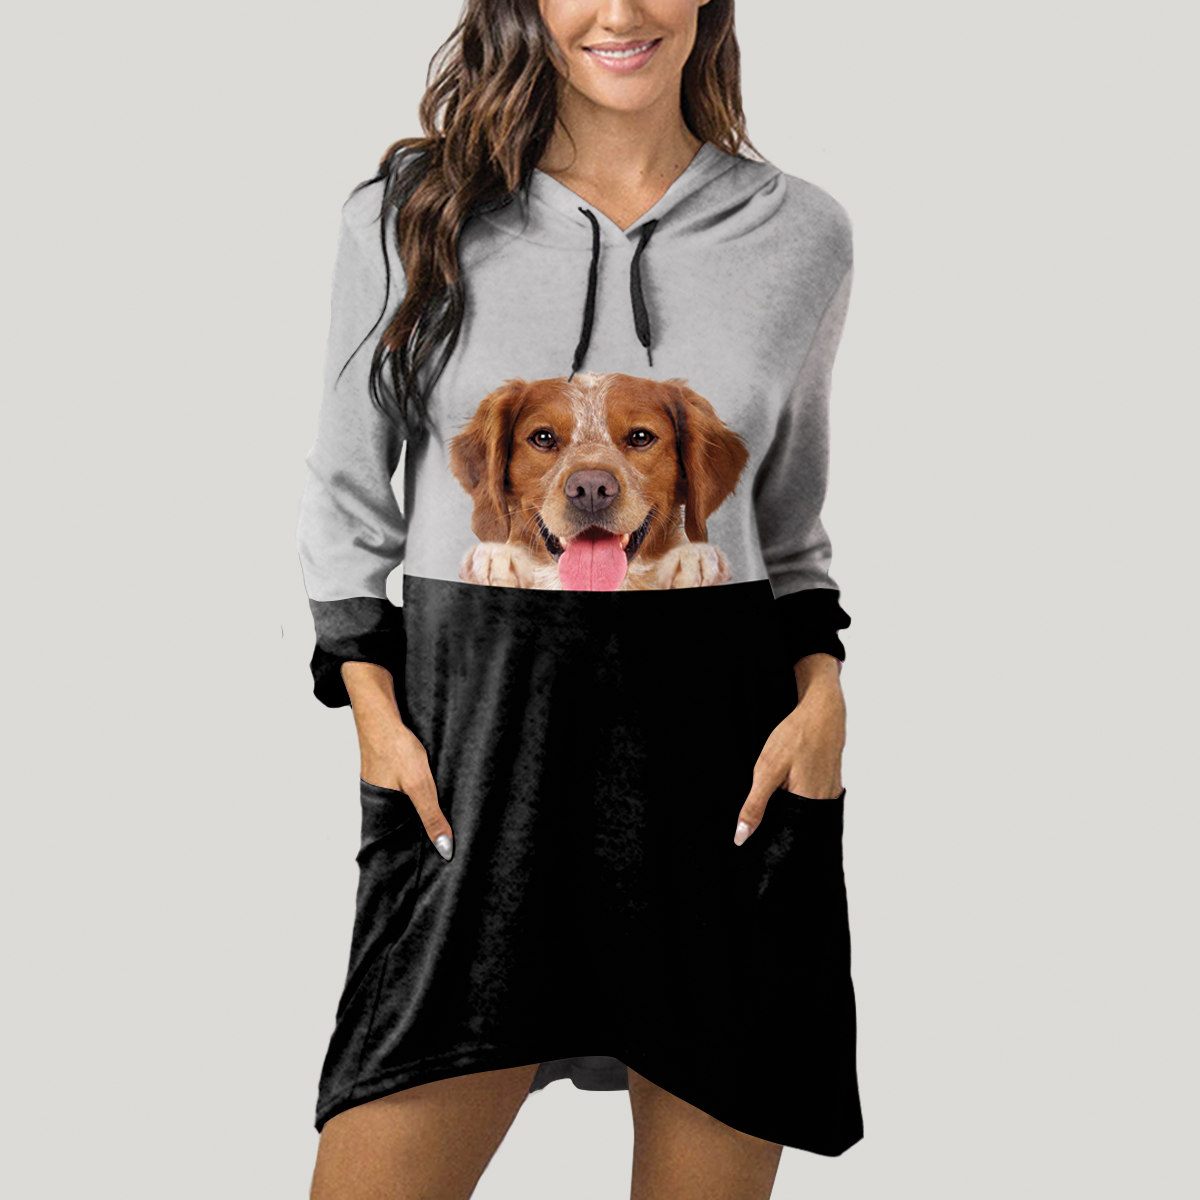 Can You See Me Now - Brittany Spaniel Hoodie With Ears V1